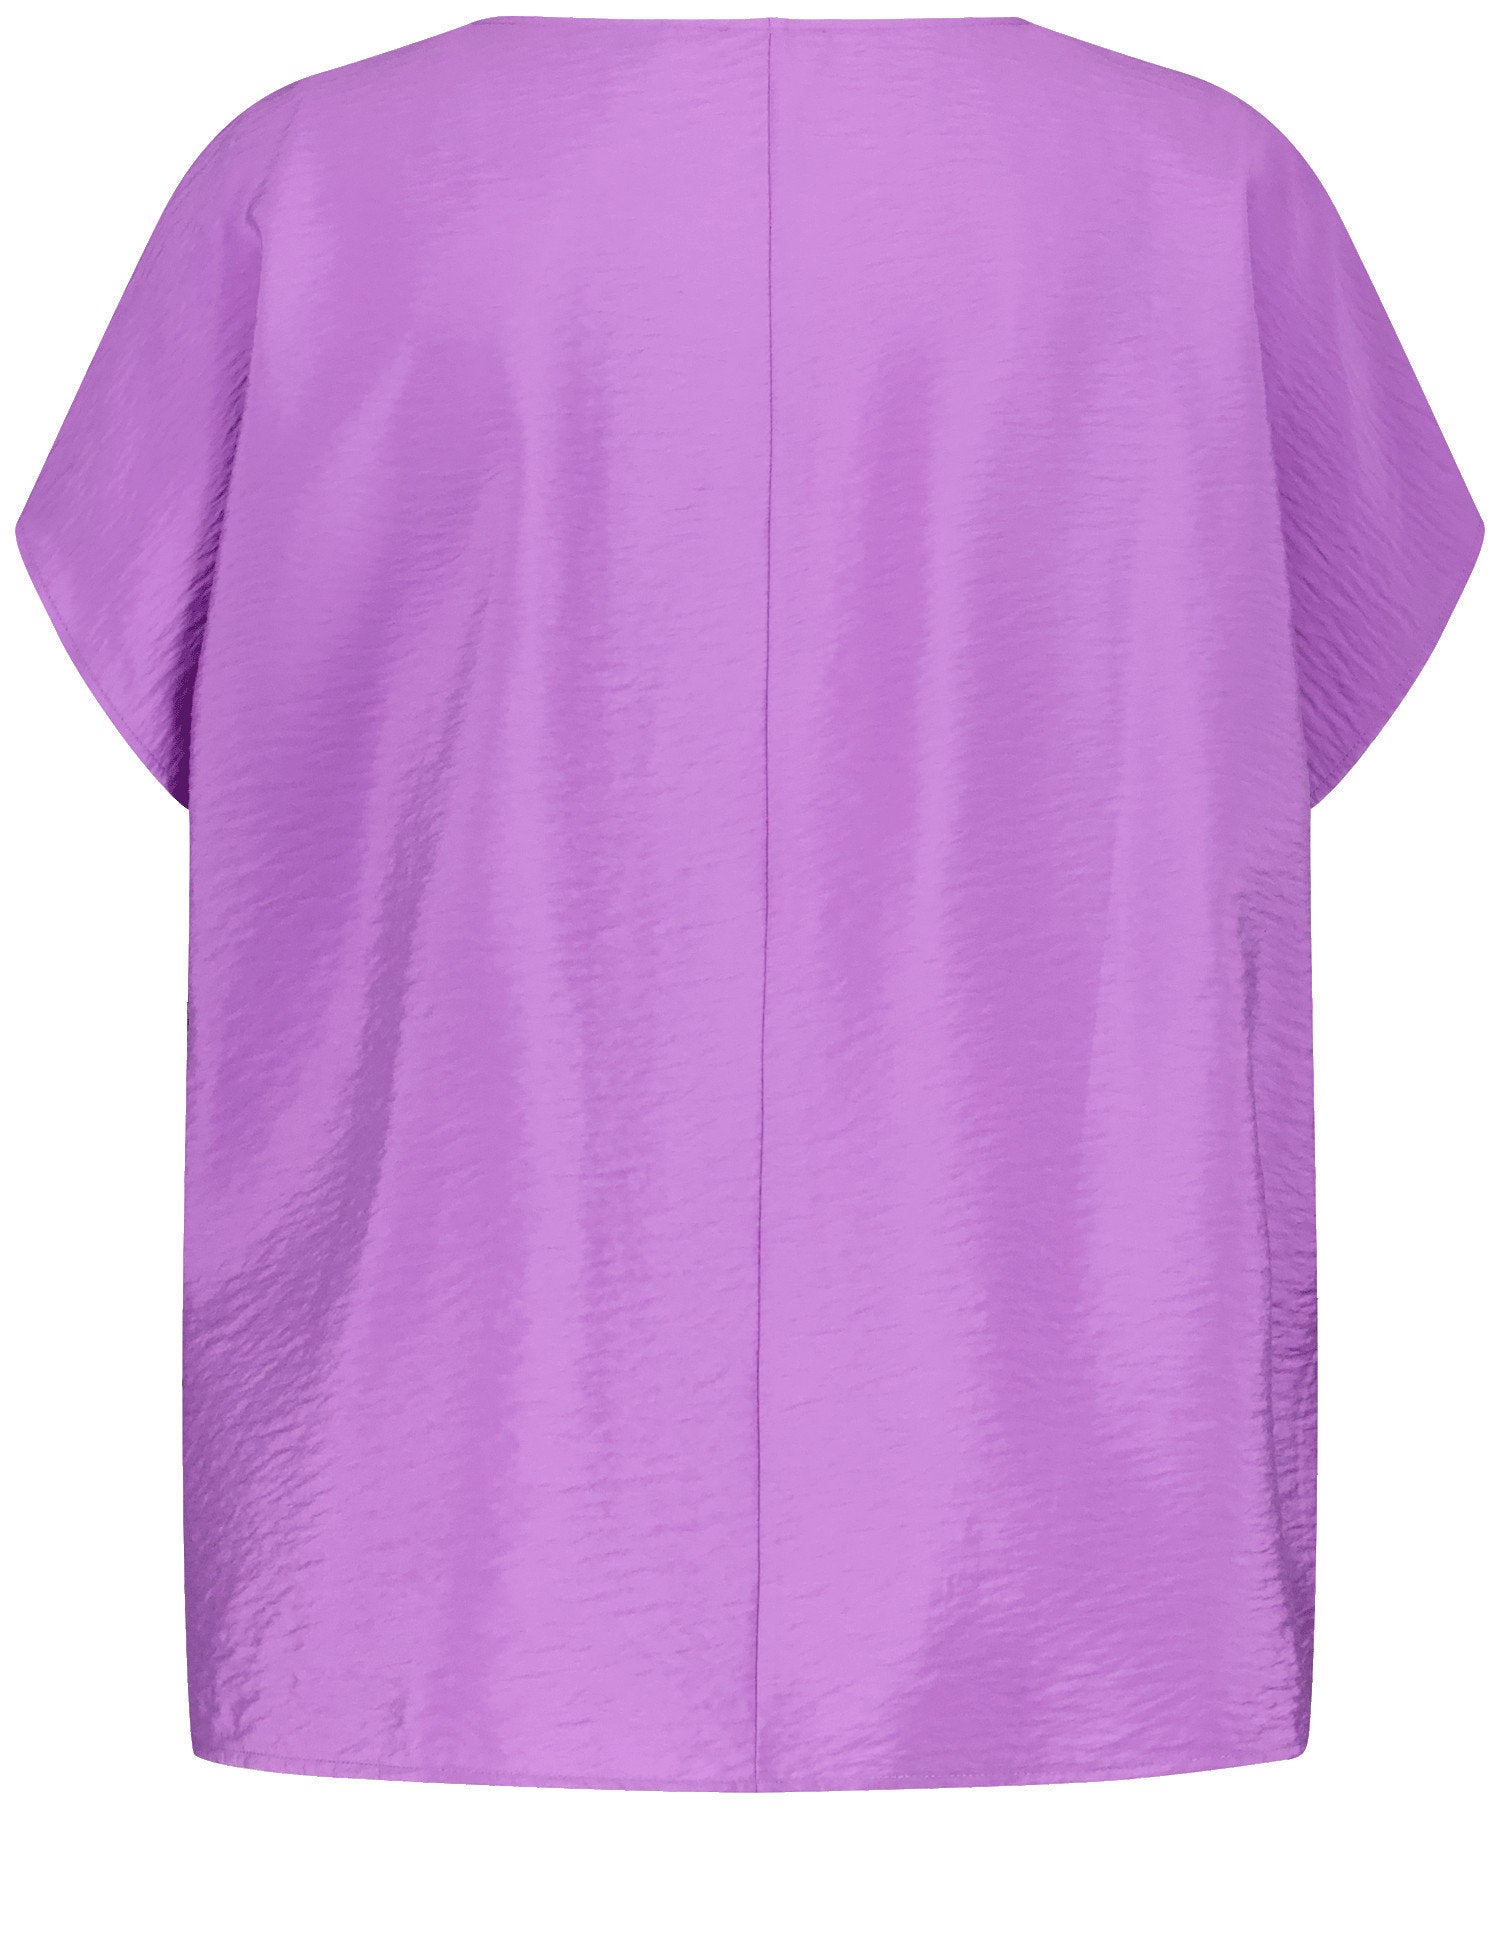 Blouse Top With A Subtle Shimmer_460040-21052_3470_08